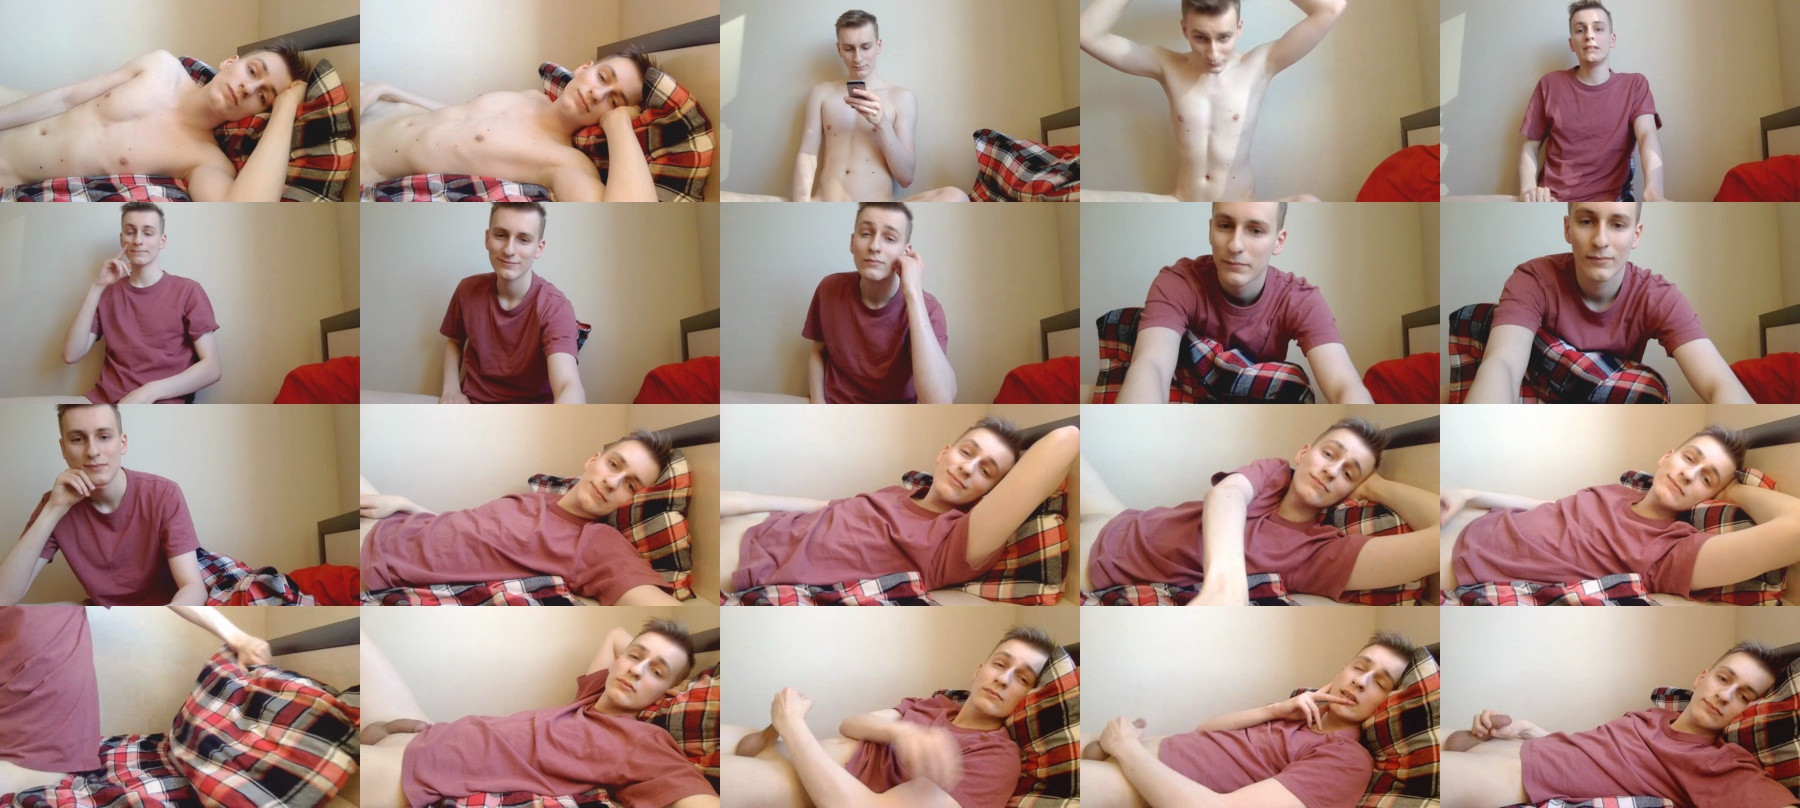 3andy3 Show CAM SHOW @ Chaturbate 22-03-2021